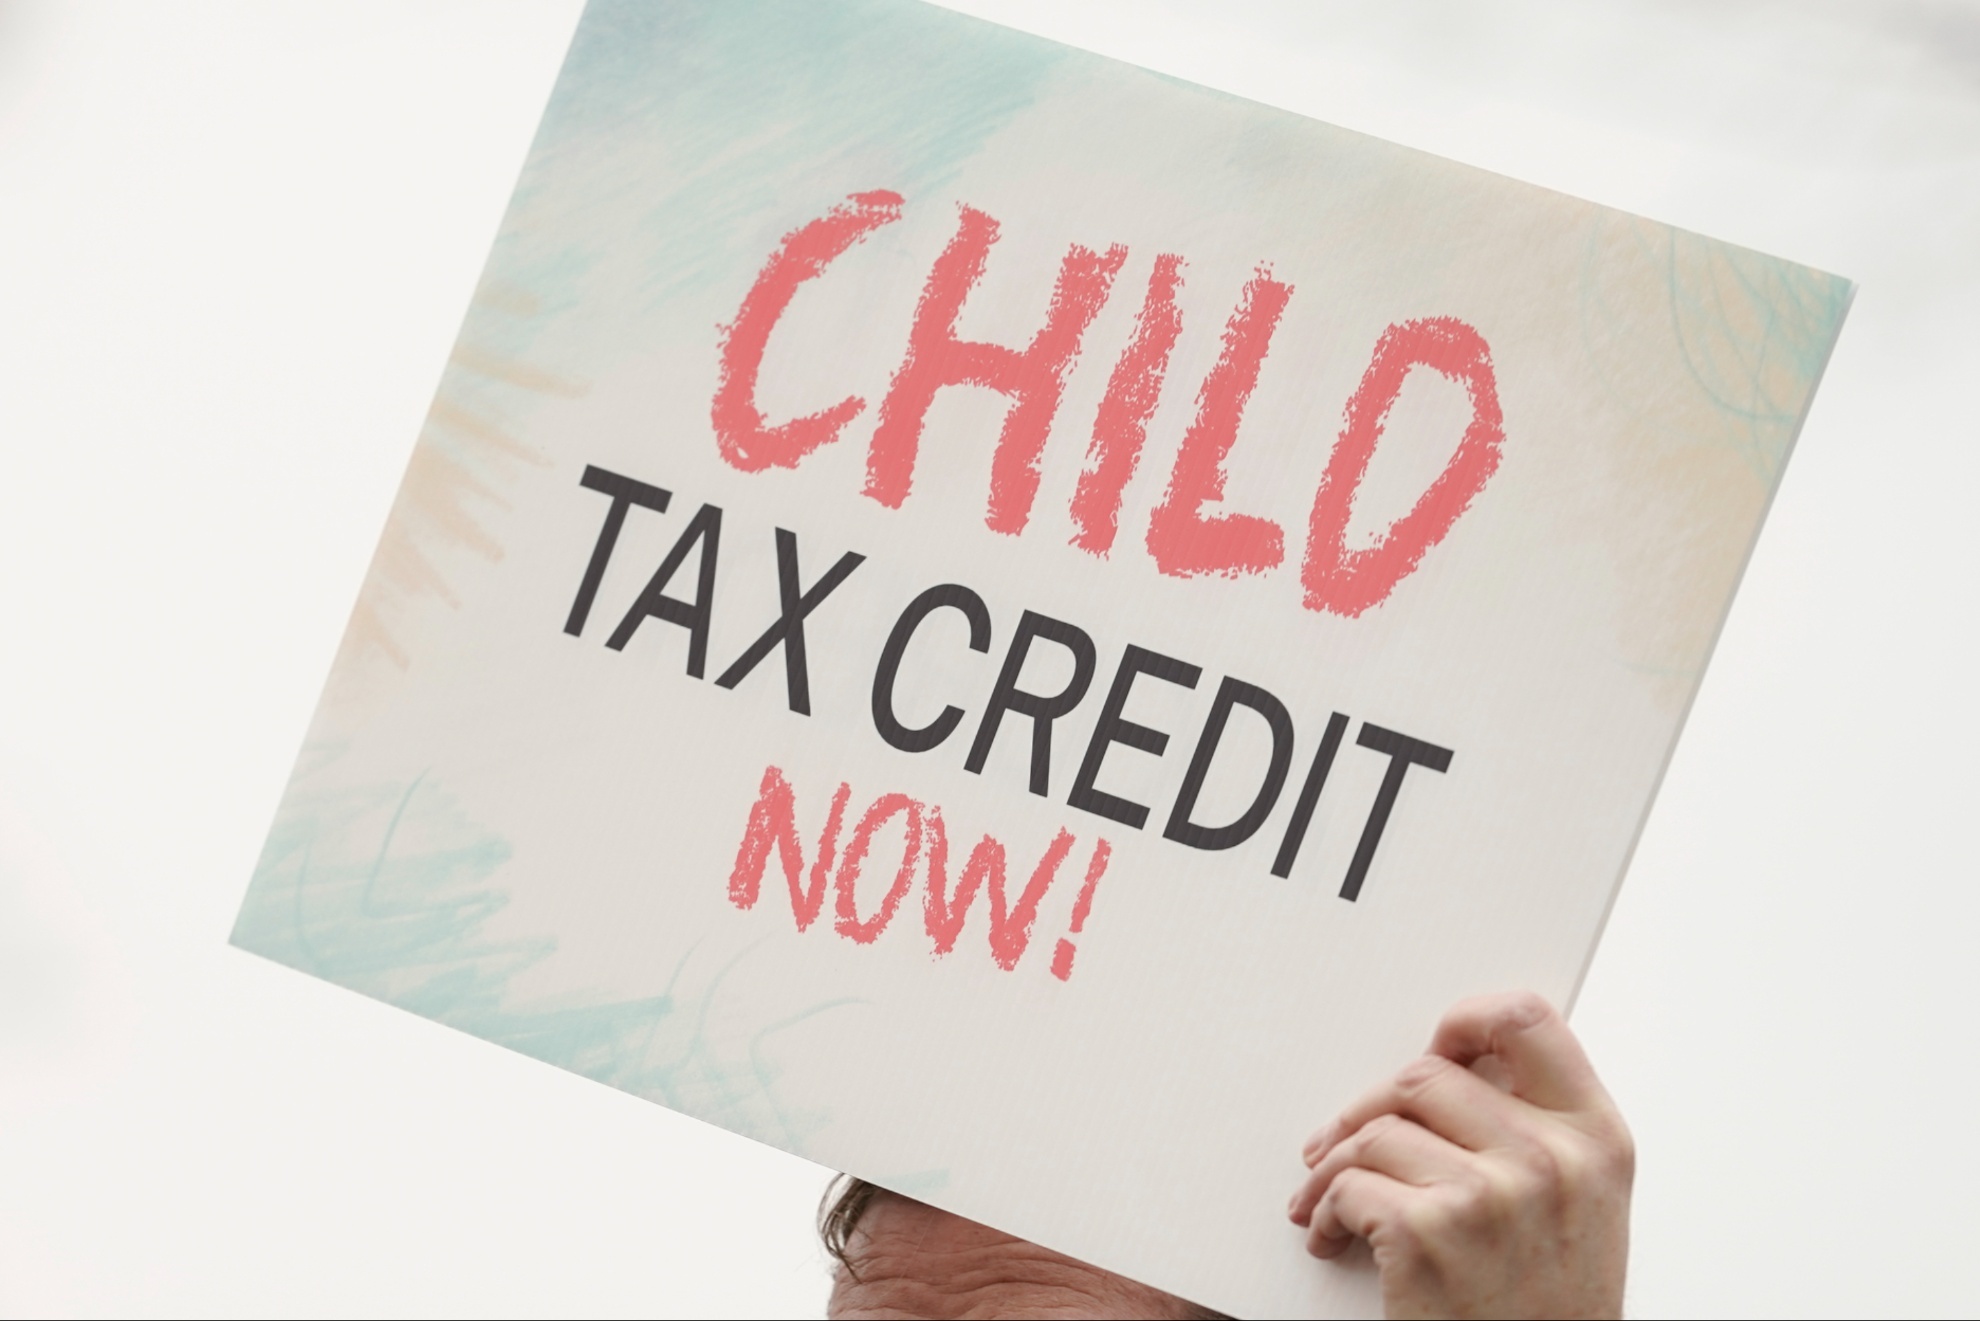 Child Tax Credit News Latest CTC updates and payment schedule